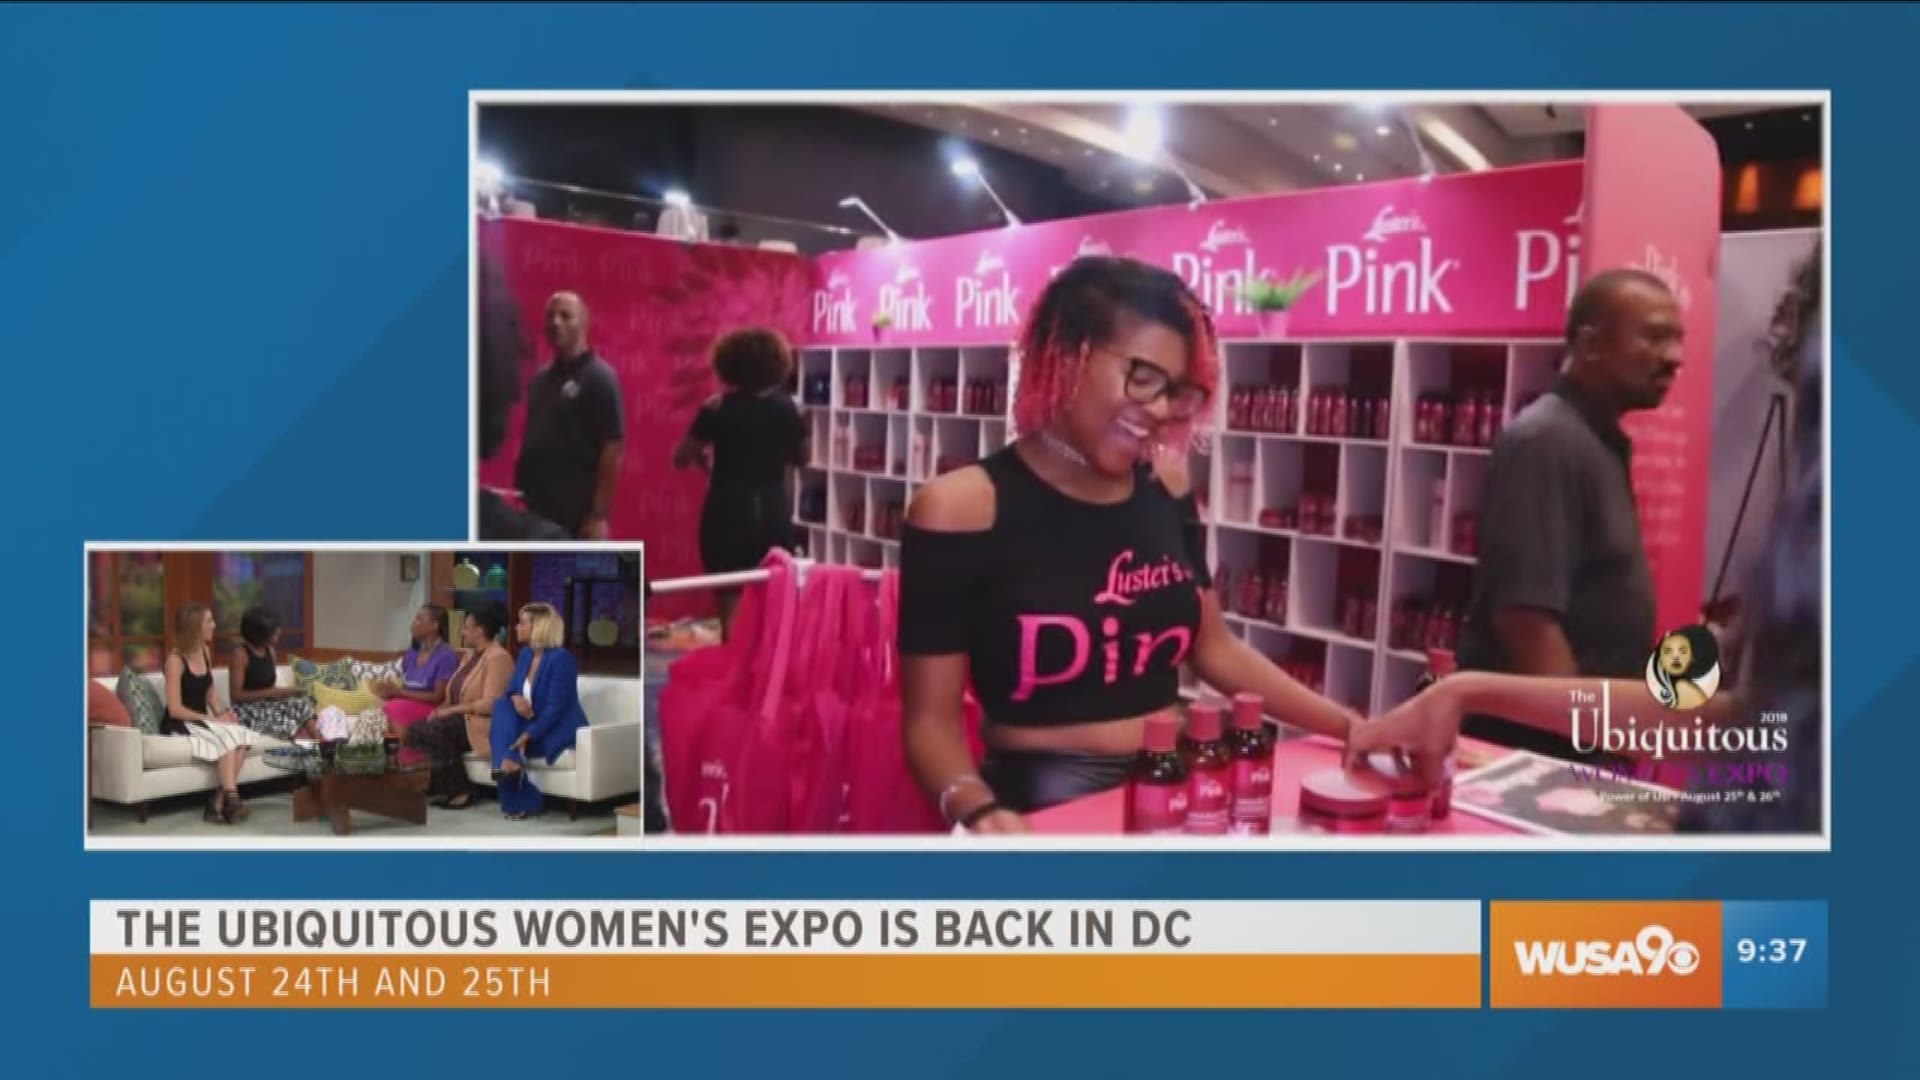 The Ubiquitous Women's Expo is back to bring women of all ages for two days of excellence, celebrating all things beauty, hair, wellness, health, and more. Event creator Germaine Bolds-Leftridge joins the Great Day show with Robyn Dixon of The Real Housewives of Potomac, and Keosha Burns of Chase Home Lending.  The expo is taking place August 25th and 26th at the Walter E. Washington Convention Center in DC. For more information visit www.ubiquitousexpo.com.